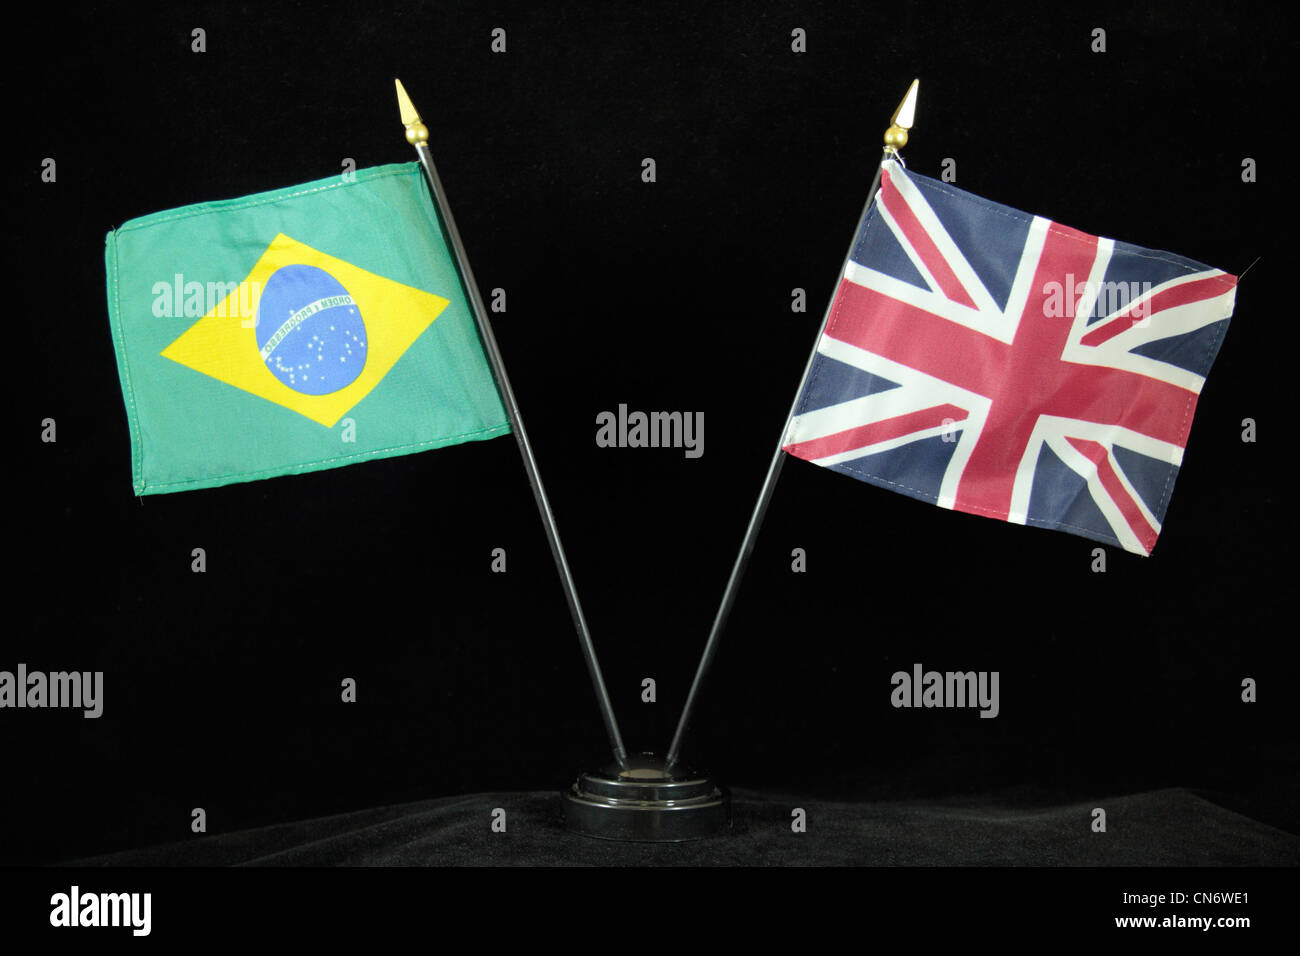 The national flags of Brazil (2016 Olympic hosts) & the United Kingdom (2012 Olympic hosts) on a black background. Stock Photo